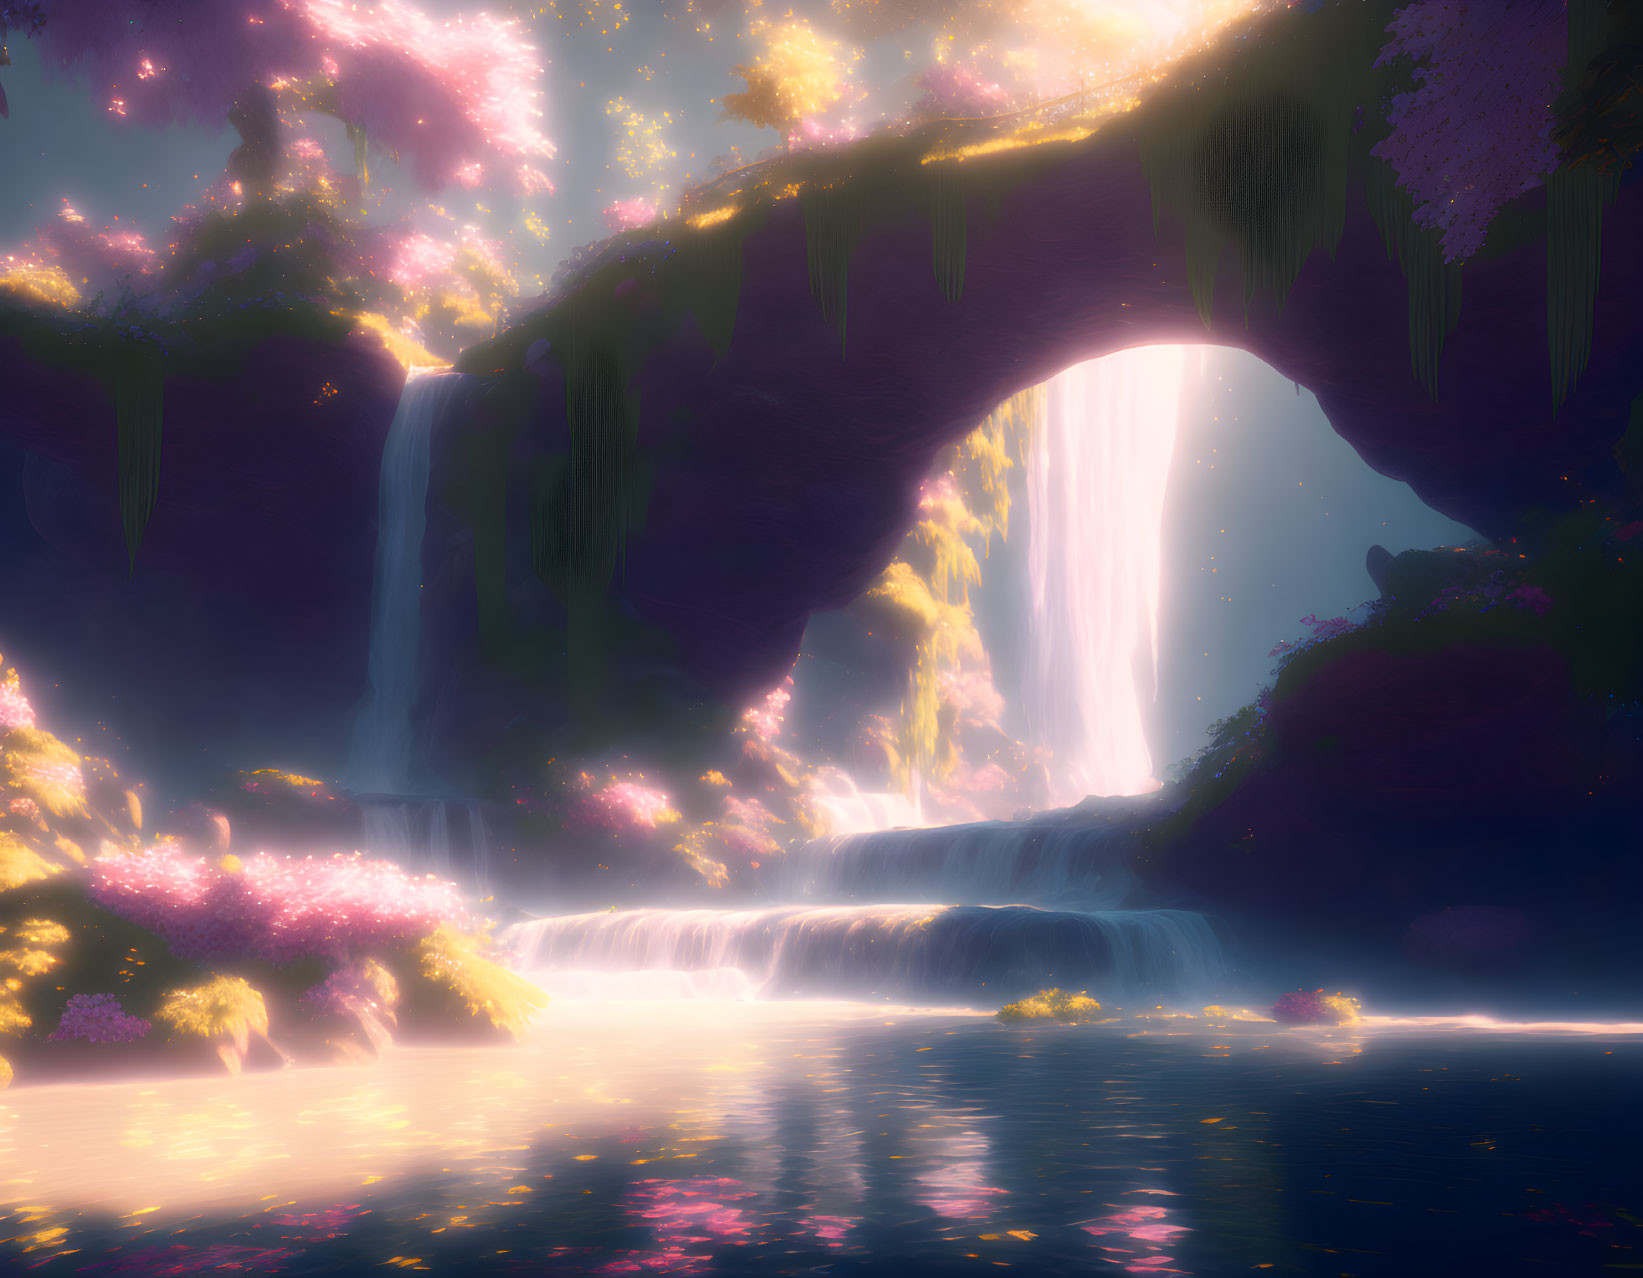 Lush Floral Archway Waterfall at Sunset or Sunrise